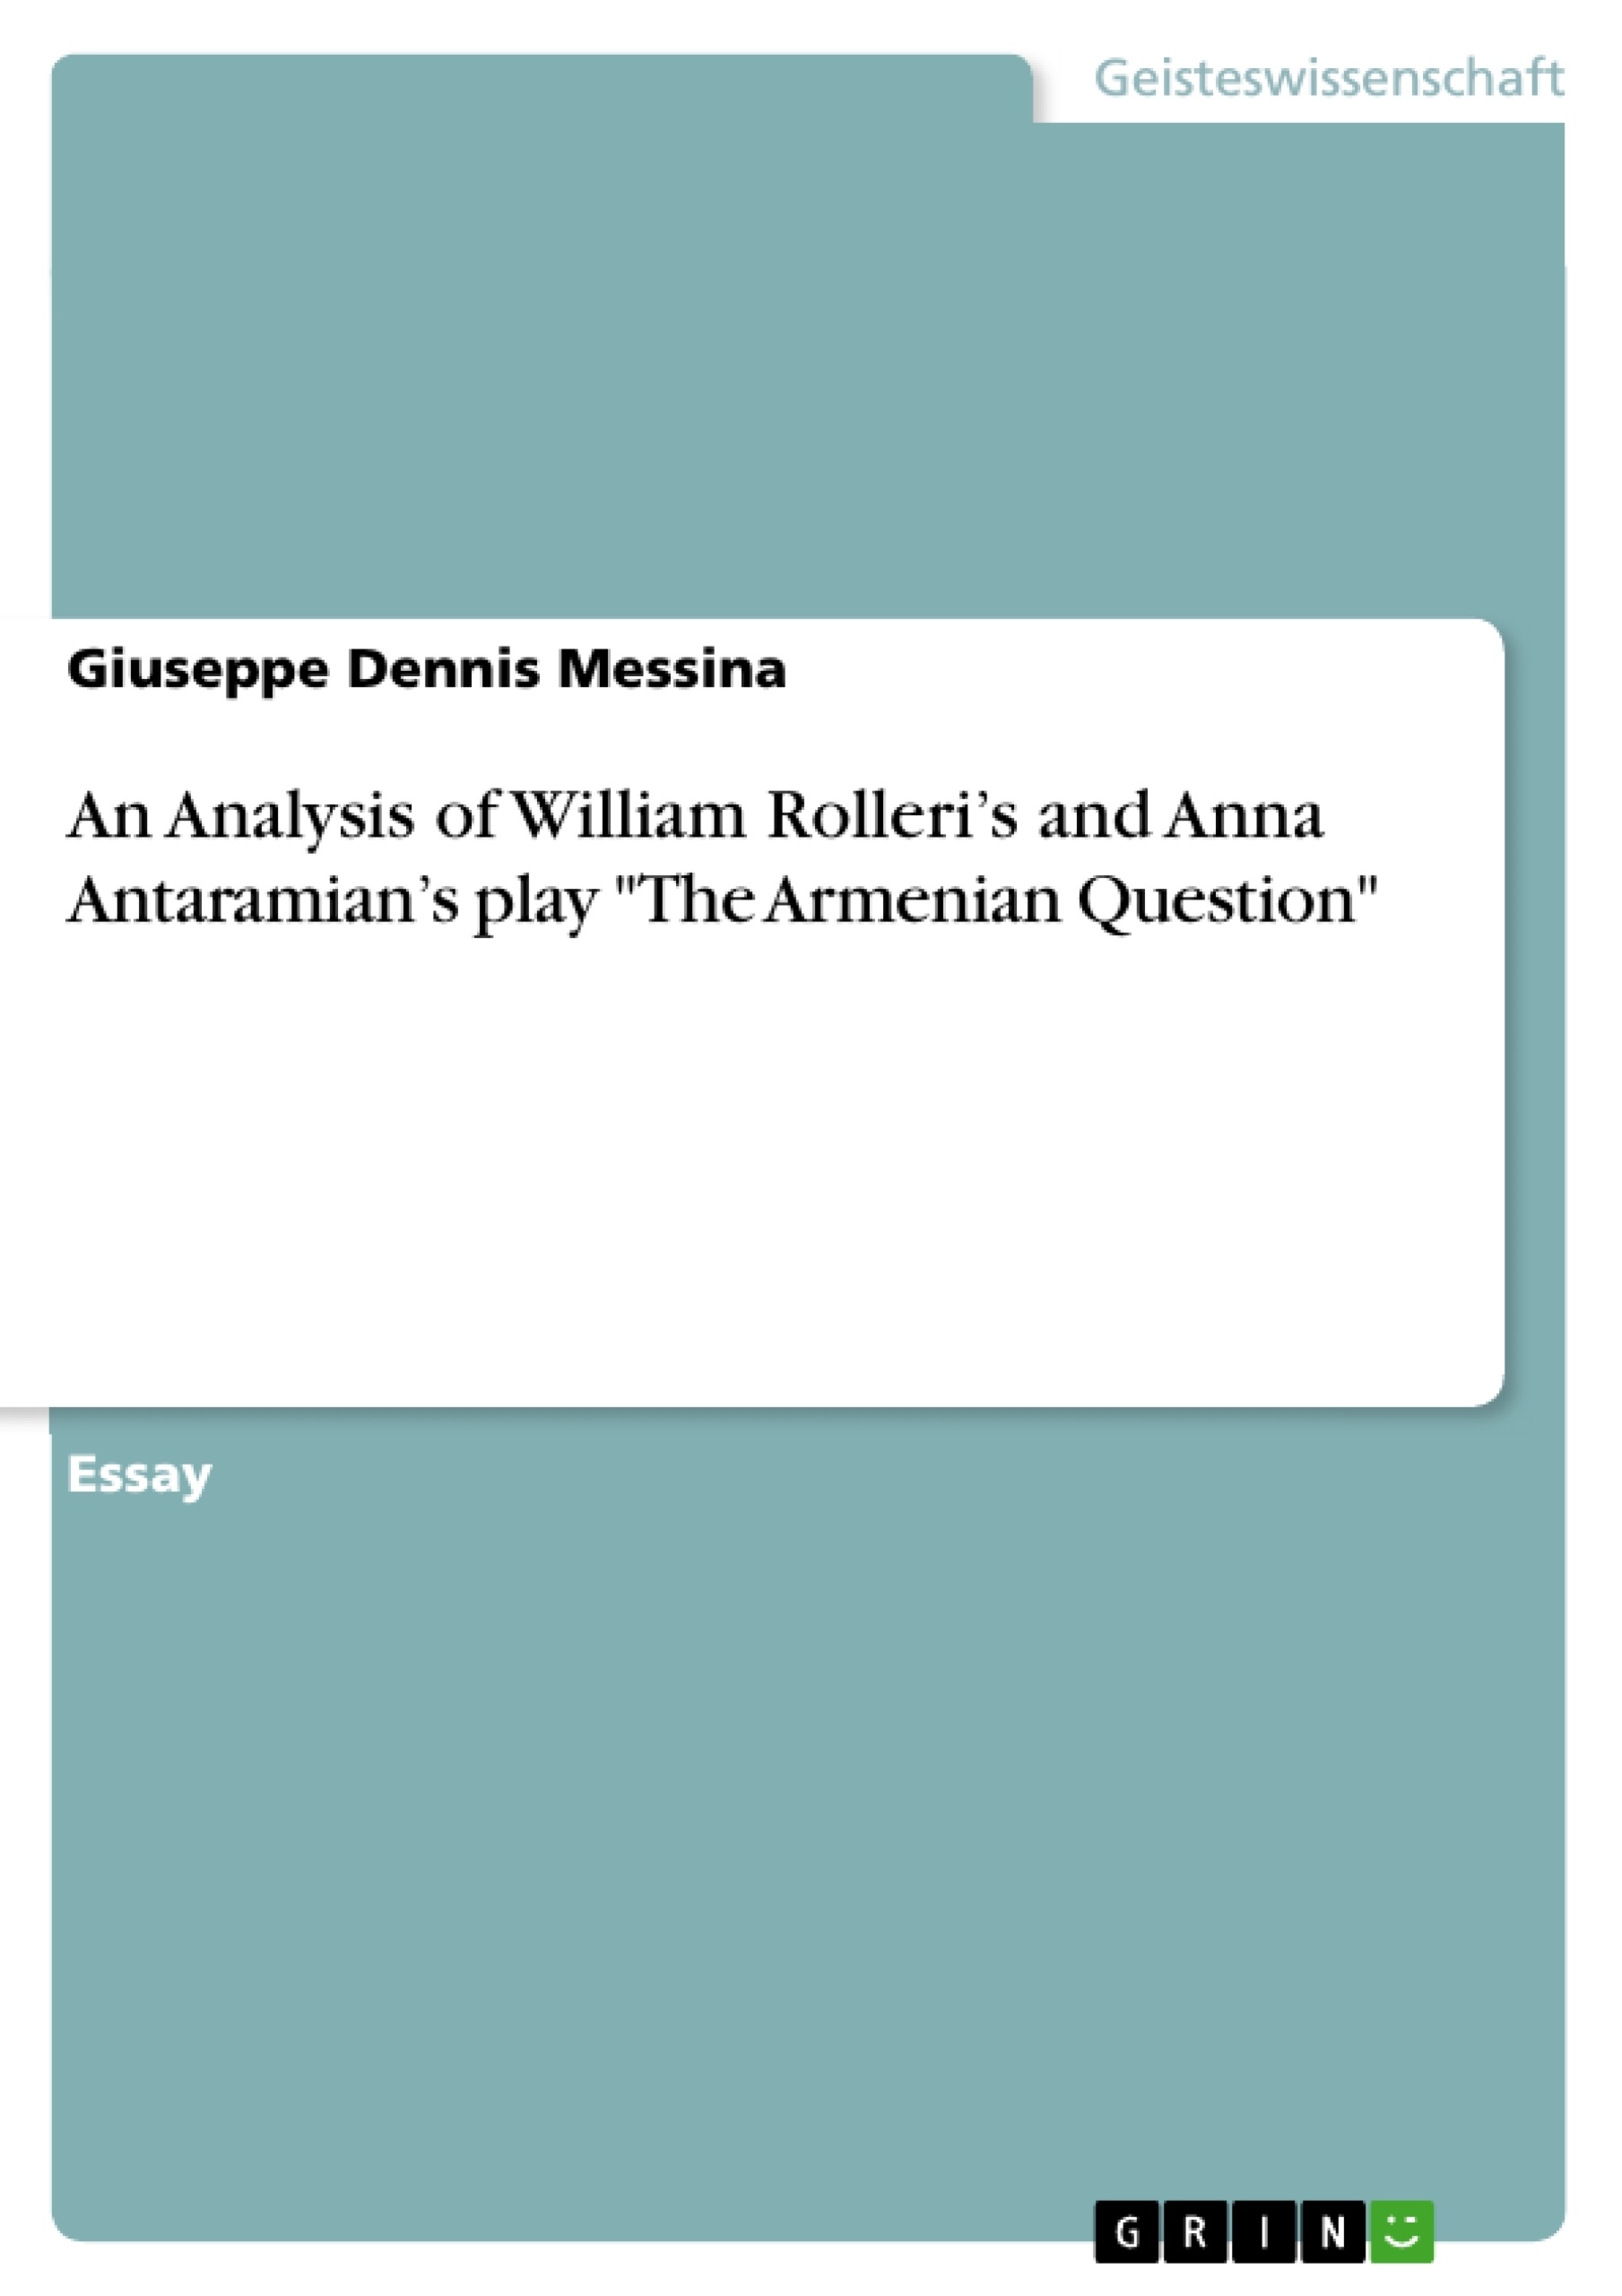 Titel: An Analysis of William Rolleri’s and Anna Antaramian’s play "The Armenian Question"